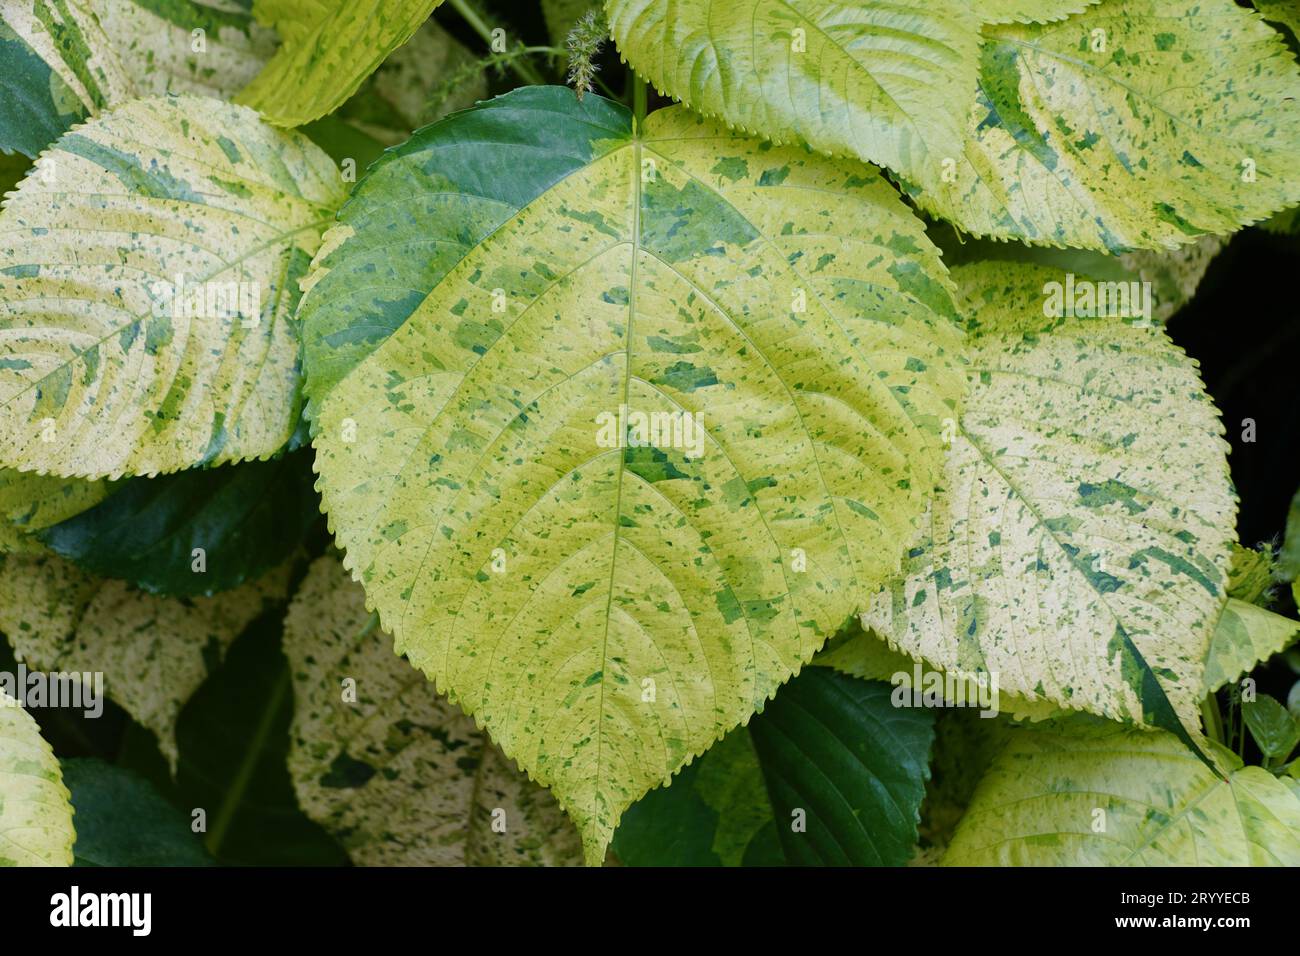 Bright green colors of Copperleaf 'Kona Gold' leaves, with scientific name Acalypha wilkesiana Stock Photo